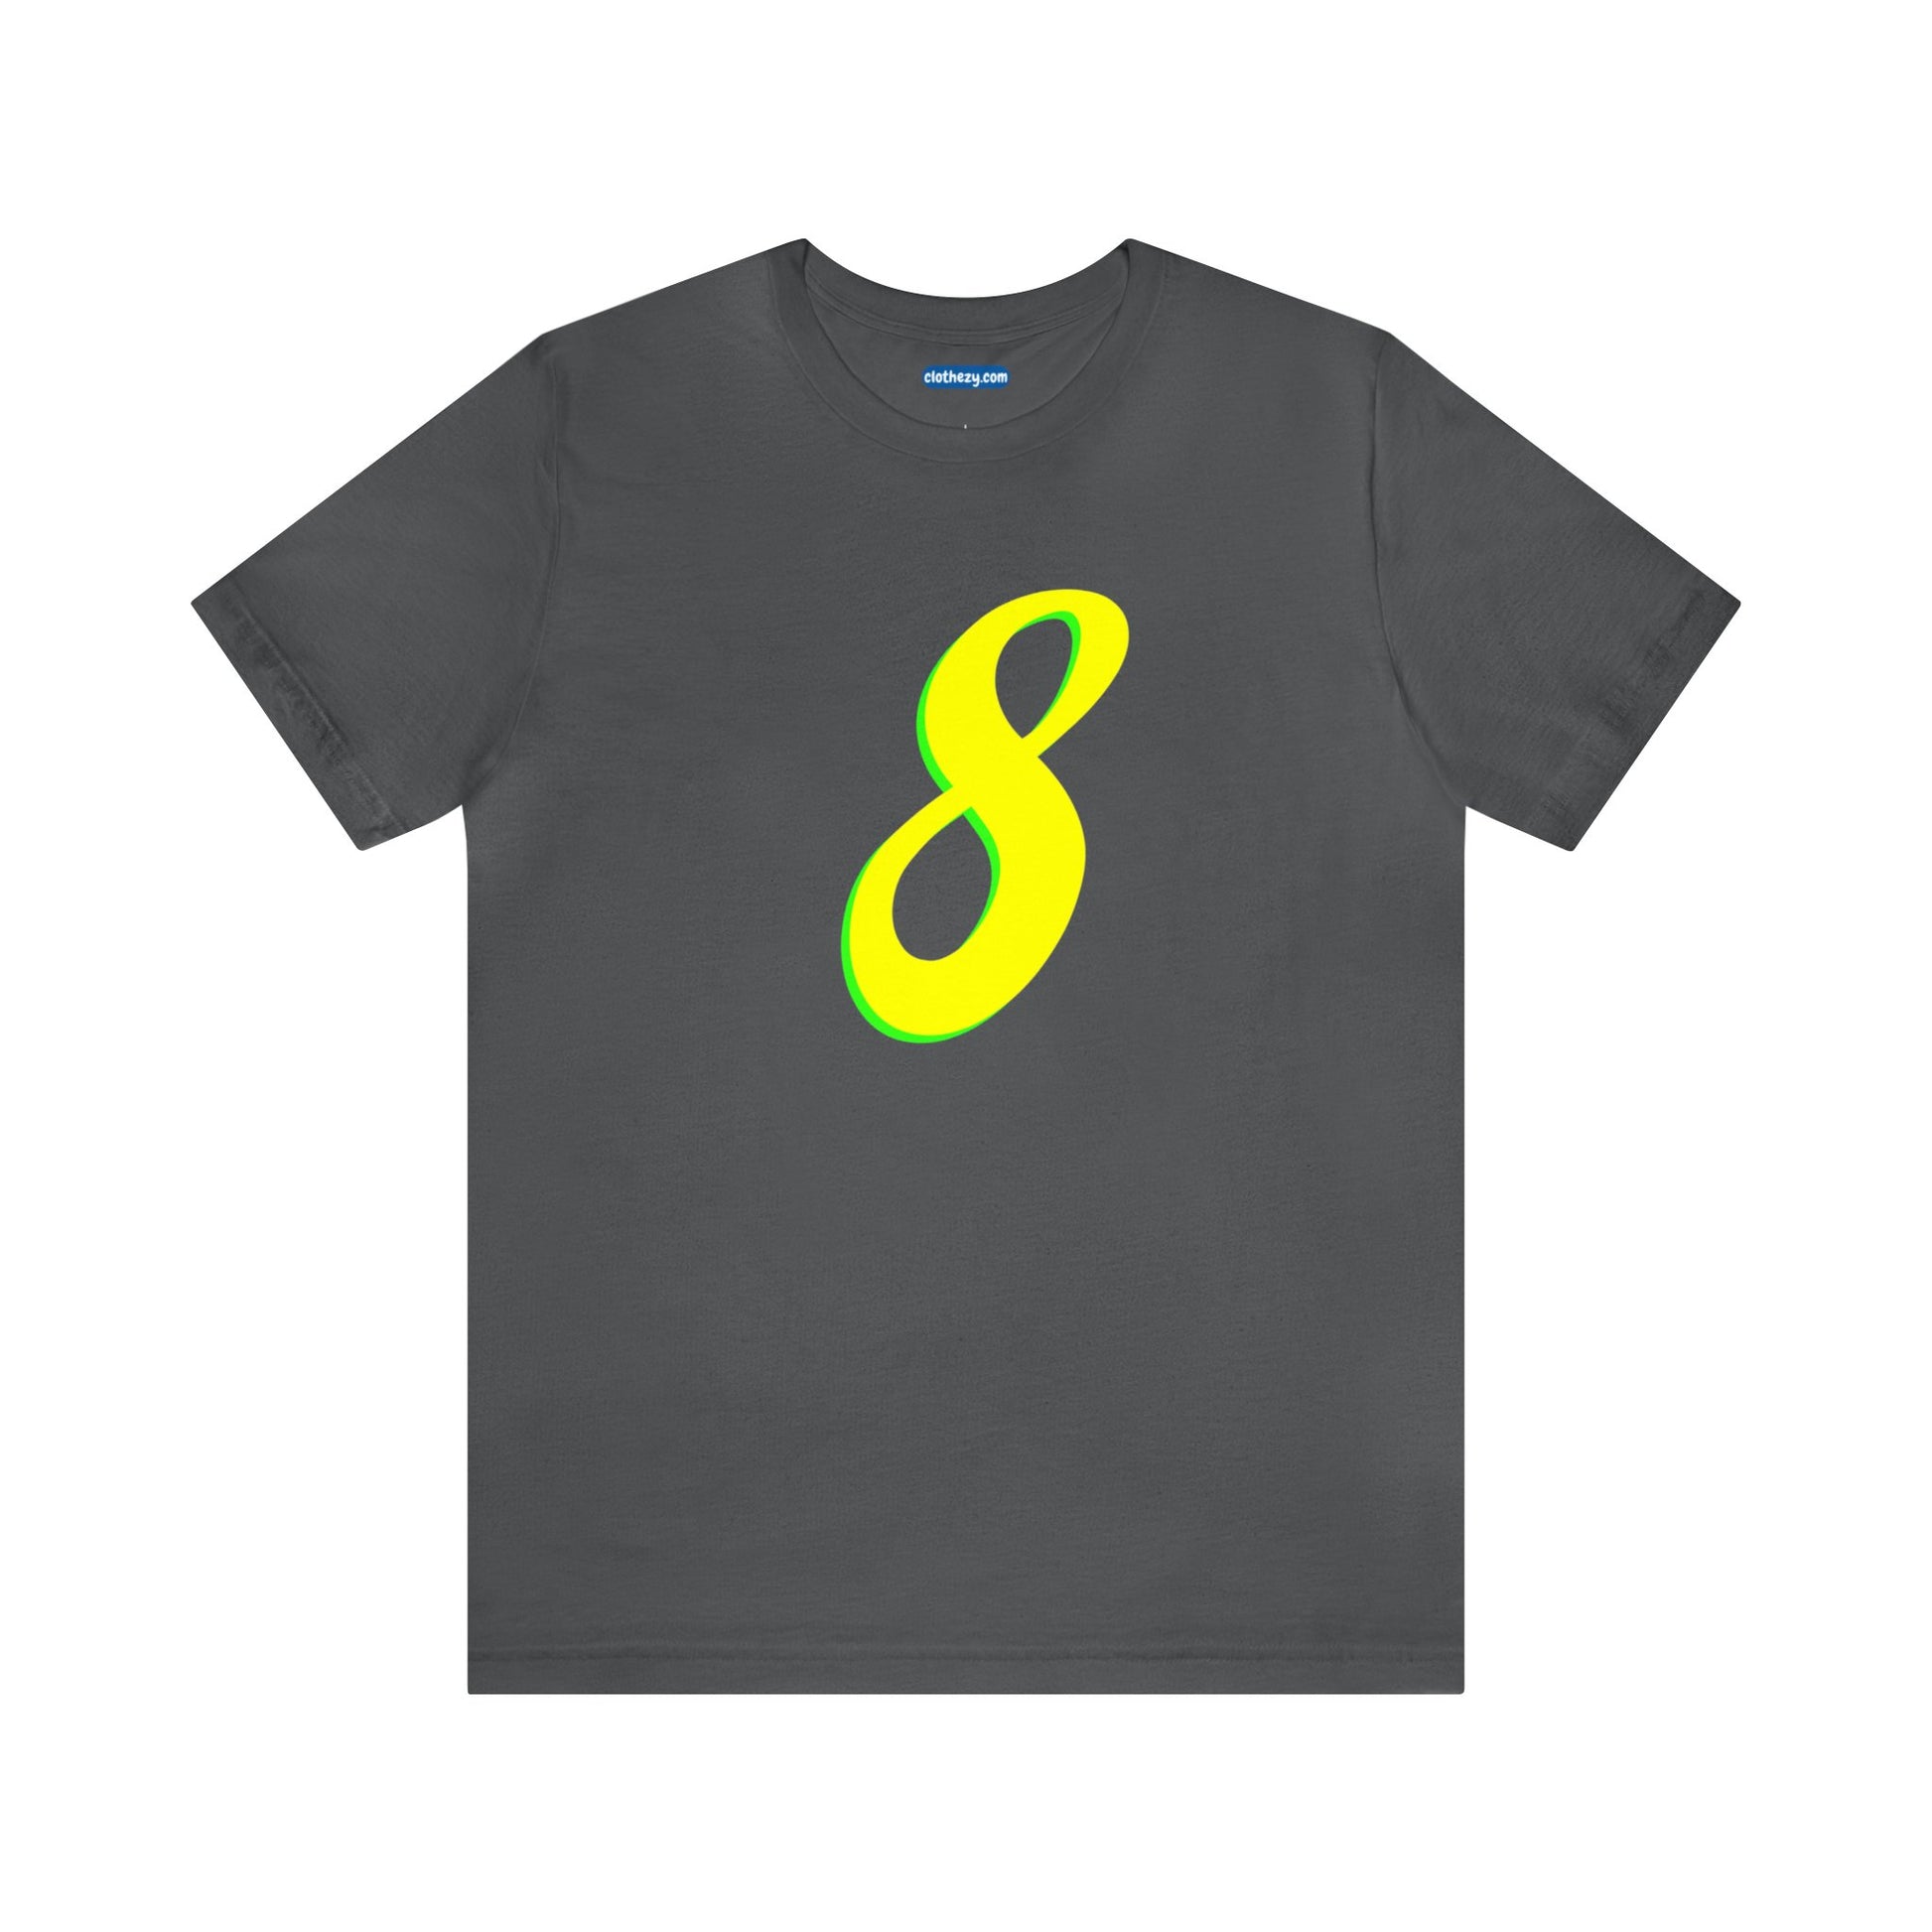 Number 8 Design - Soft Cotton Tee for birthdays and celebrations, Gift for friends and family, Multiple Options by clothezy.com in Black Size Small - Buy Now